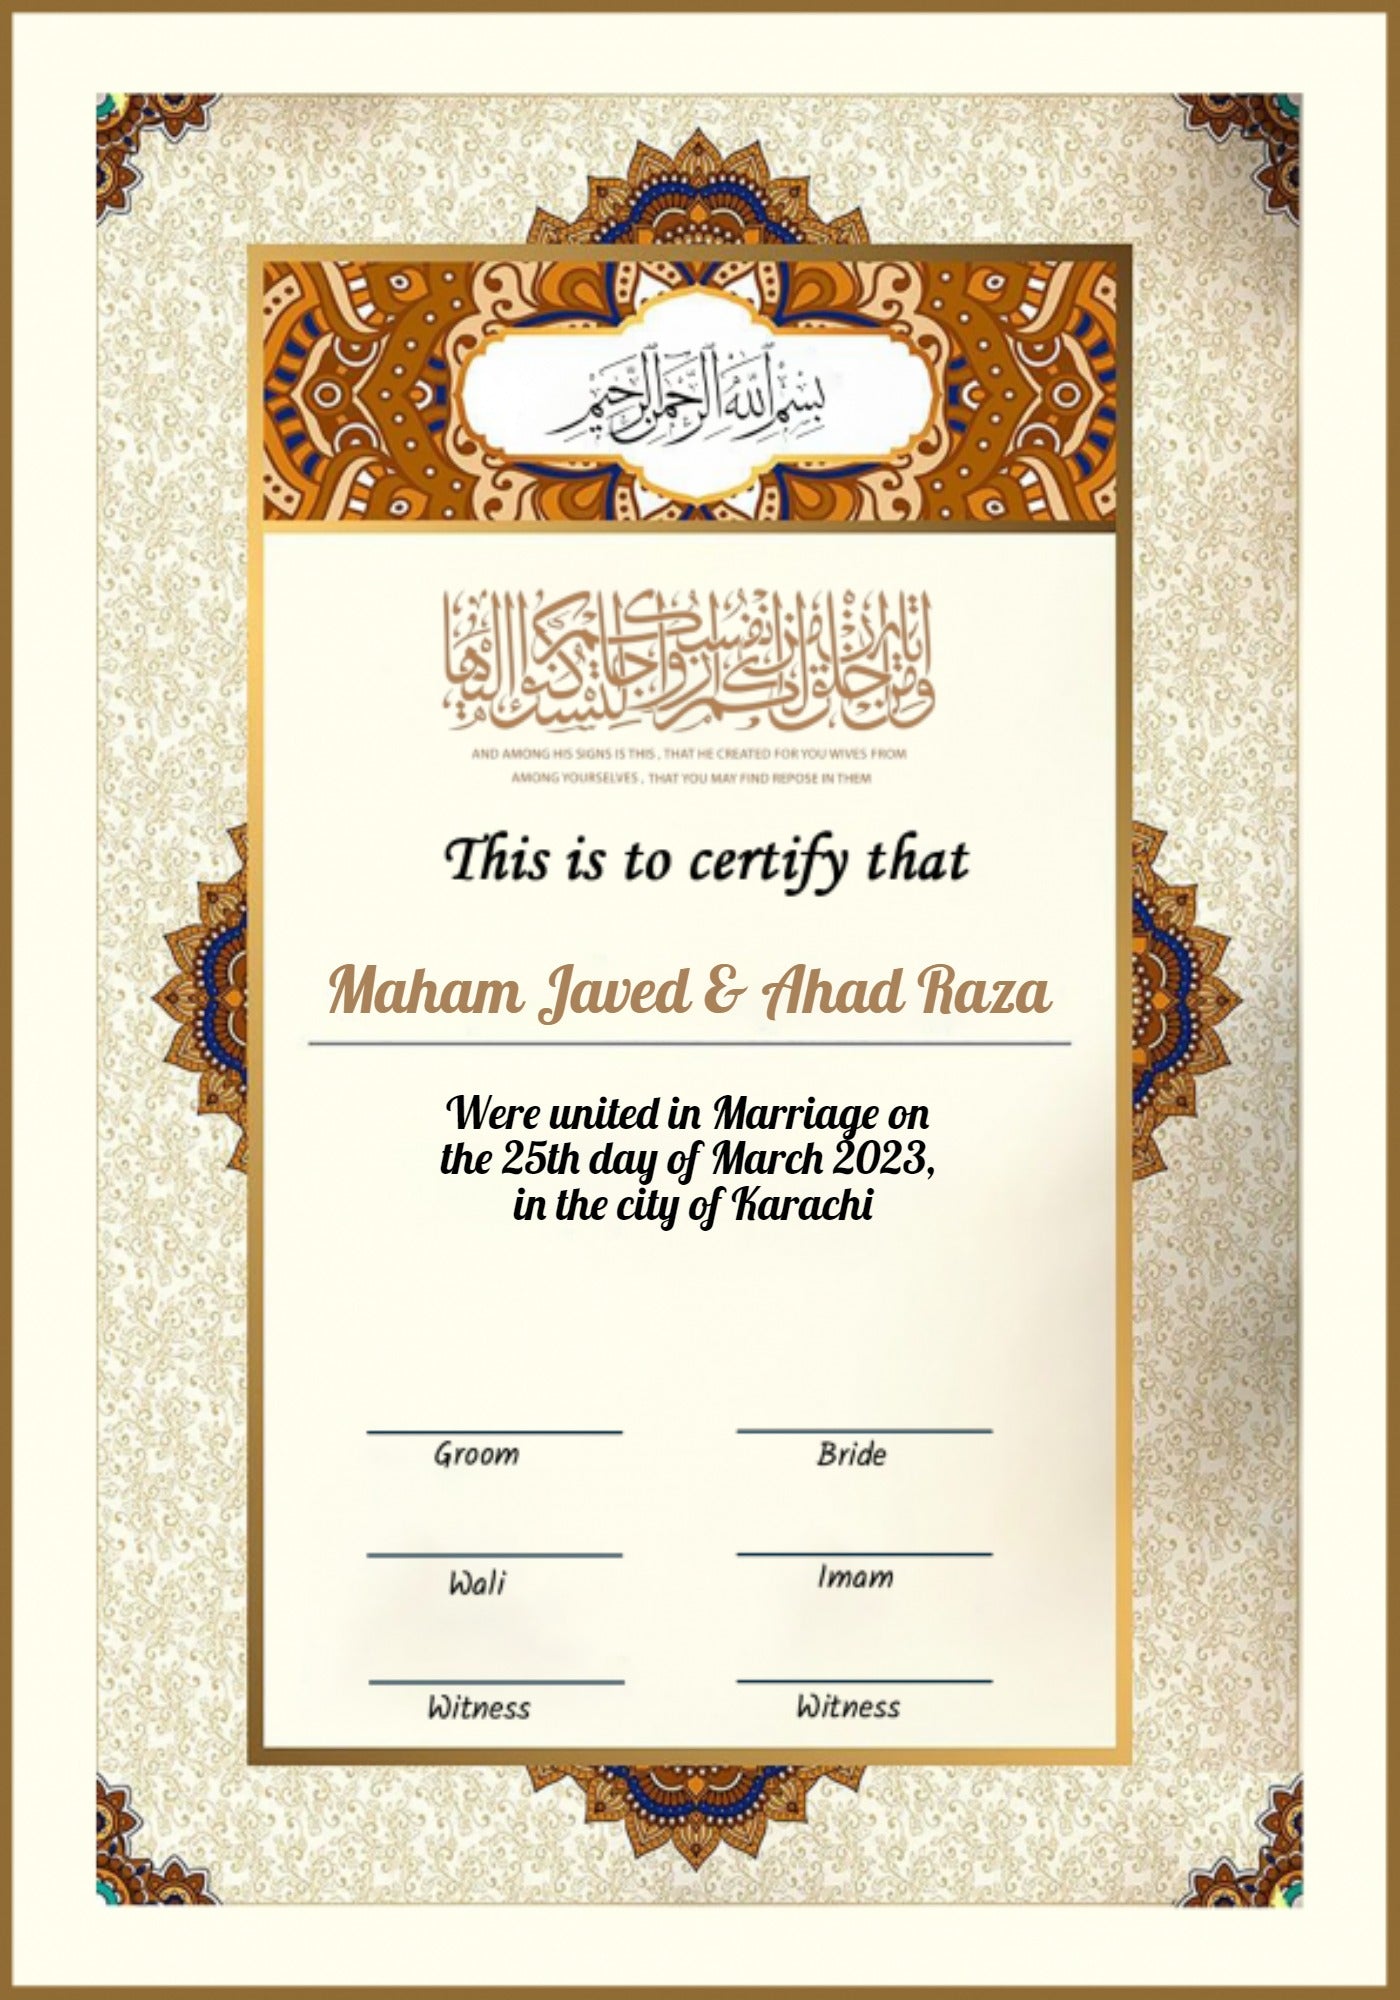 Personalized Nikkah Frame